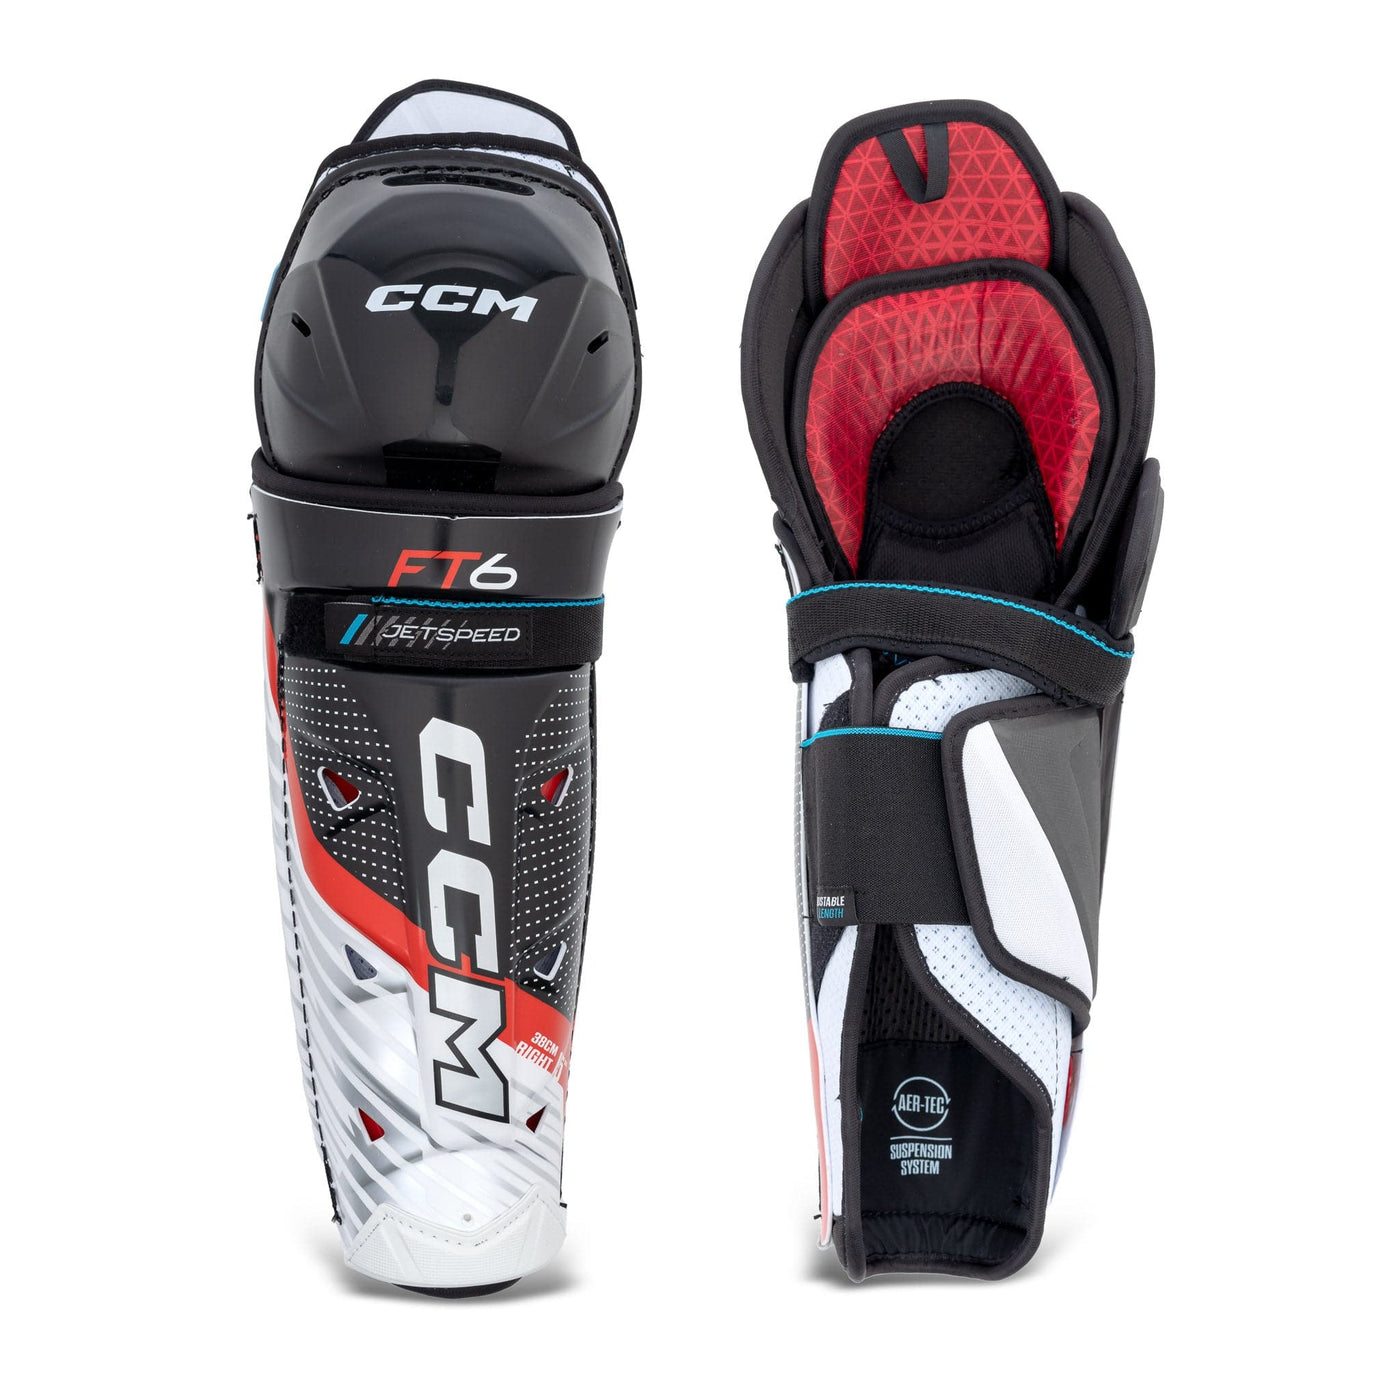 CCM Jetspeed FT6 Junior Hockey Shin Guards - The Hockey Shop Source For Sports